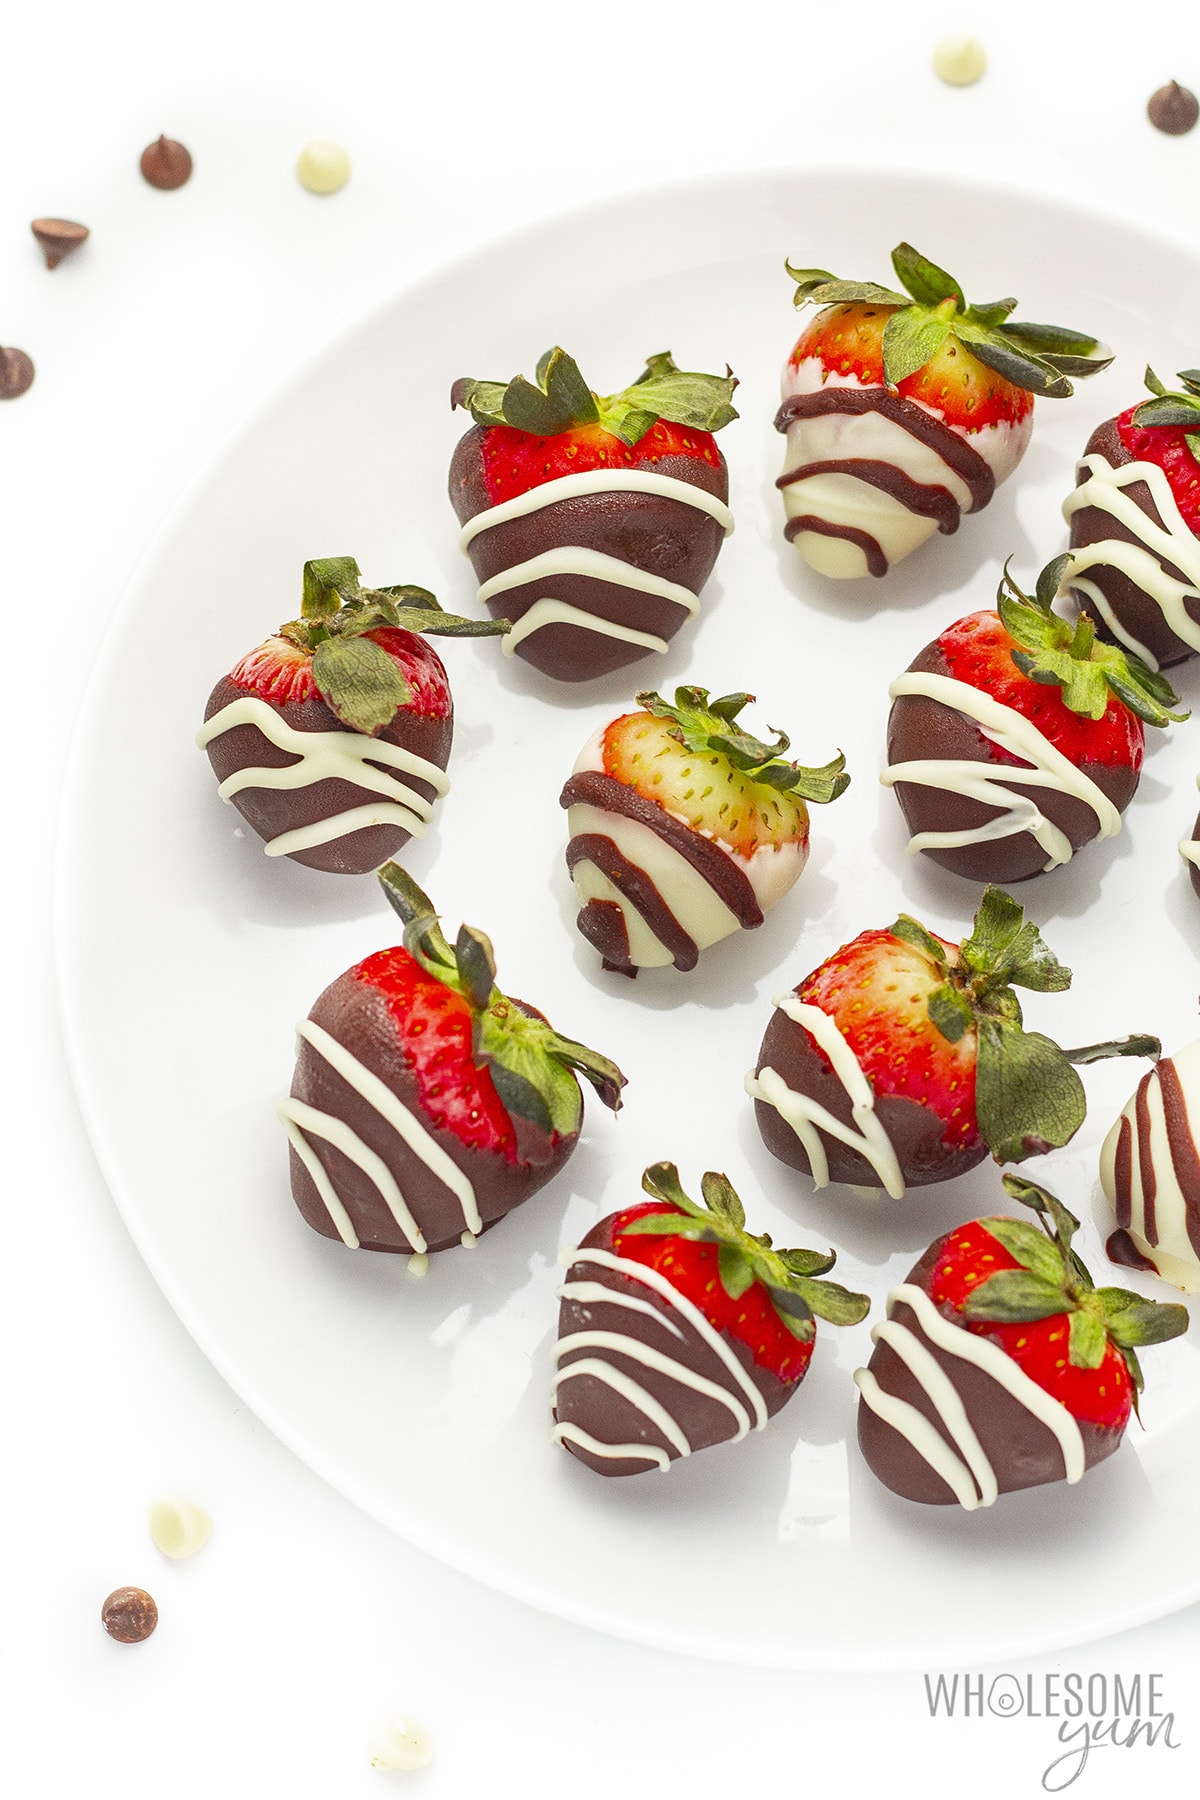 Keto chocolate covered strawberries on a plate.